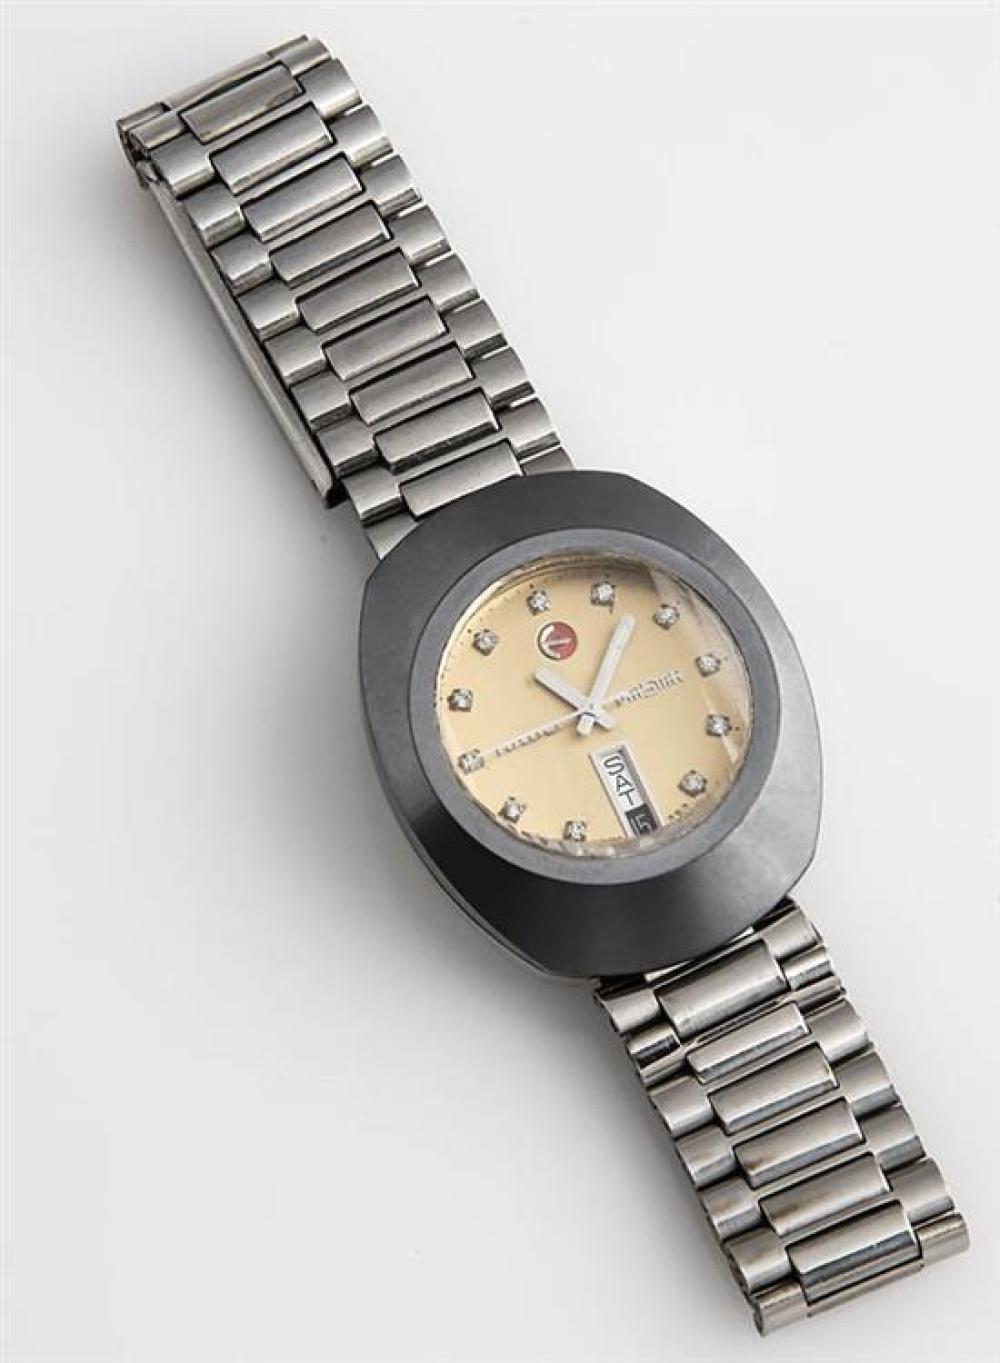 STAINLESS STEEL AUTOMATIC WRISTWATCH  32116a